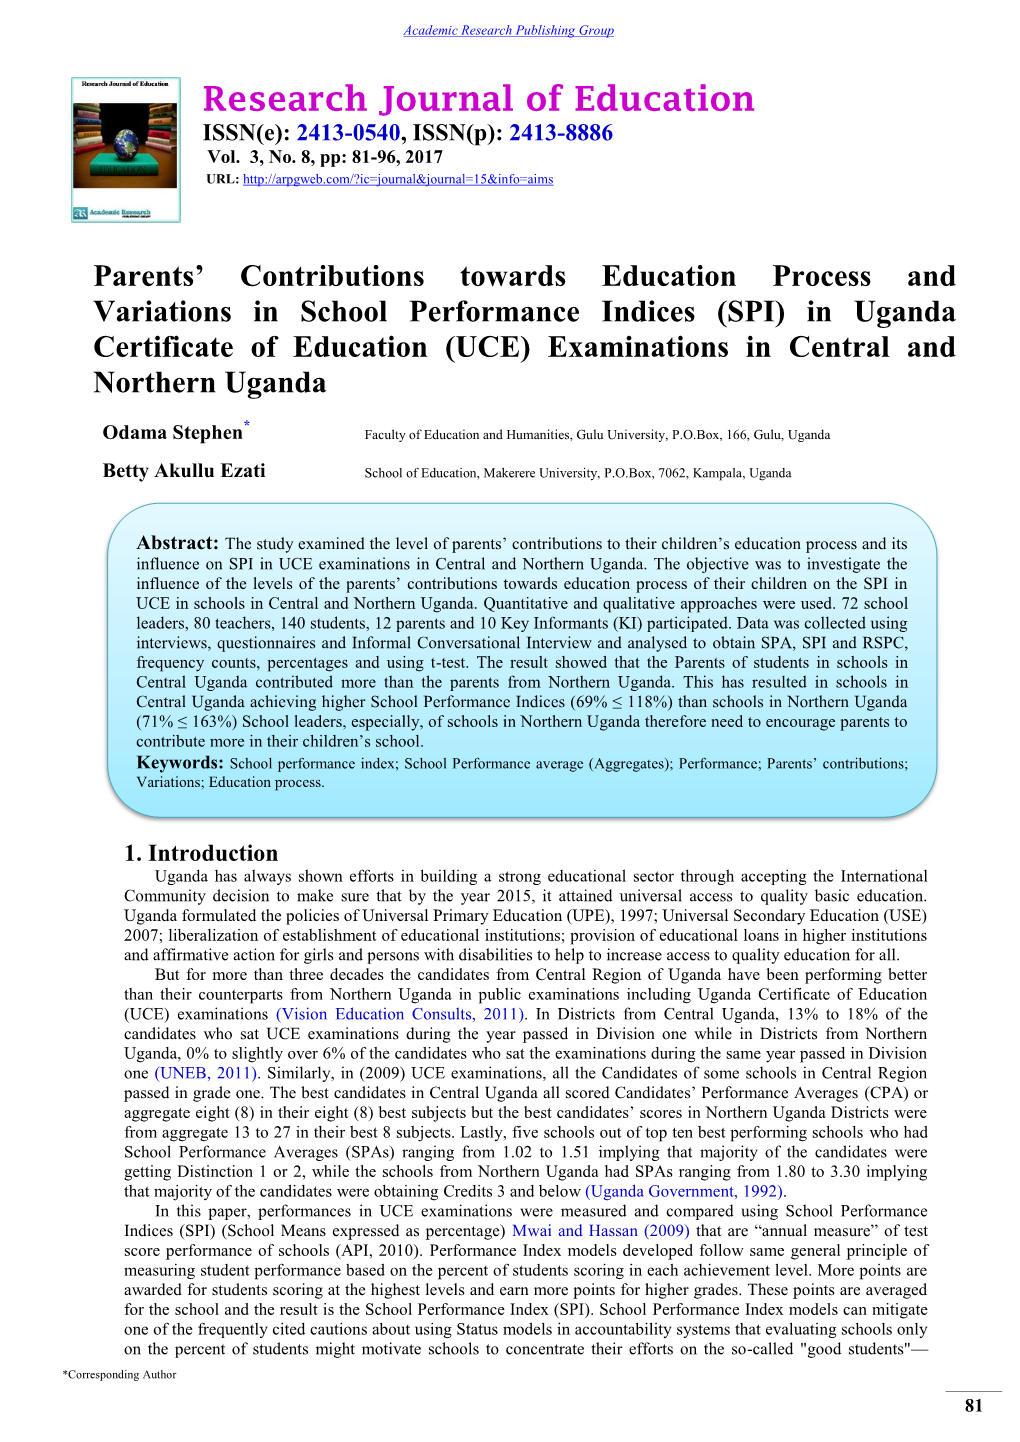 Research Journal of Education ISSN(E): 2413-0540, ISSN(P): 2413-8886 Vol